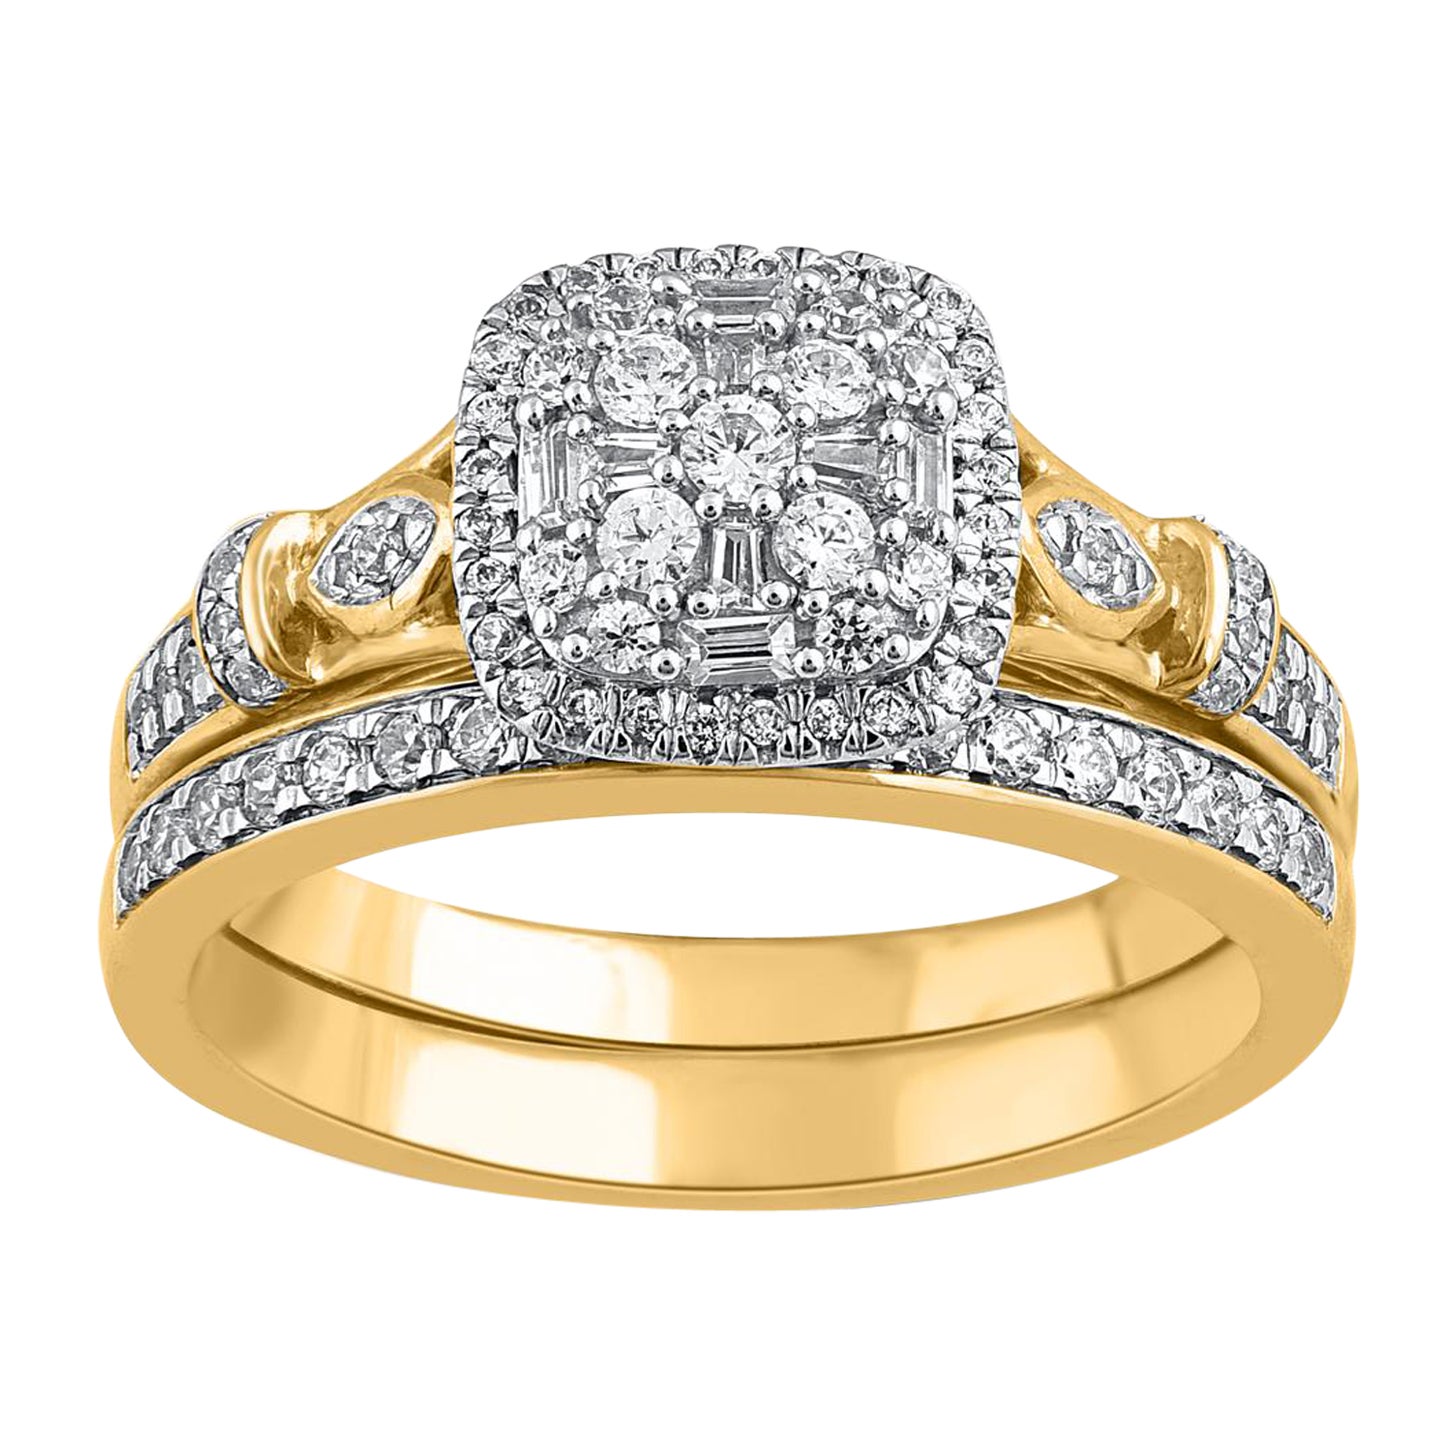 TJD 0.50 Carat Round and Baguette Cut Diamond 14KT Yellow Gold Halo Wedding Ring For Sale